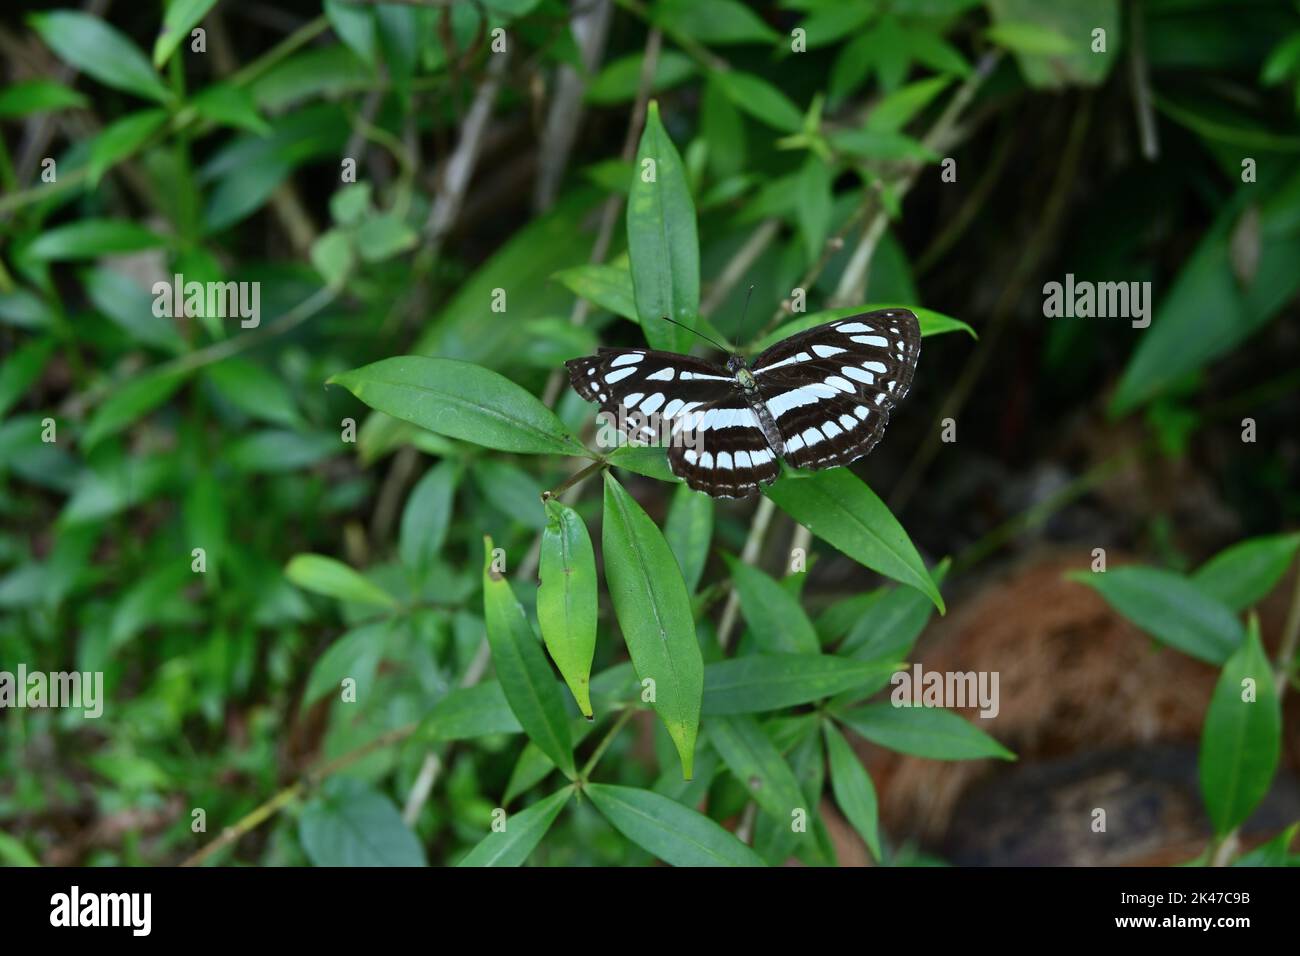 A common sailor butterfly is spreading its wings parallel while sitting on a wild leaf, revealing wing dorsal view Stock Photo